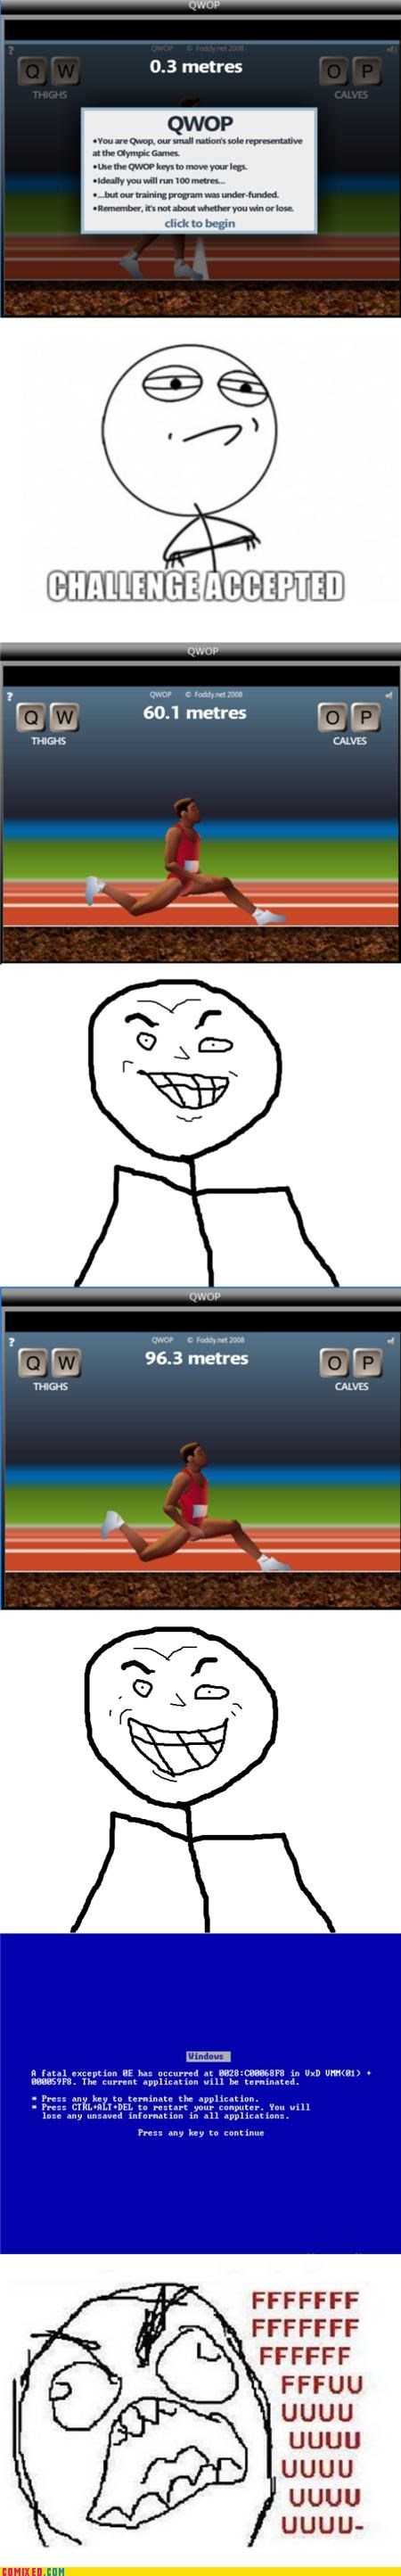 cartoon - Qwop W 0.3 metres Op Thighs Calves Qwop You are wop, our small nation's sole representative at the Olympic Games Use the Qwop keys to move your legs Ideally you will run 100 metres.. ...but our training program was underfunded. Remember, it's no